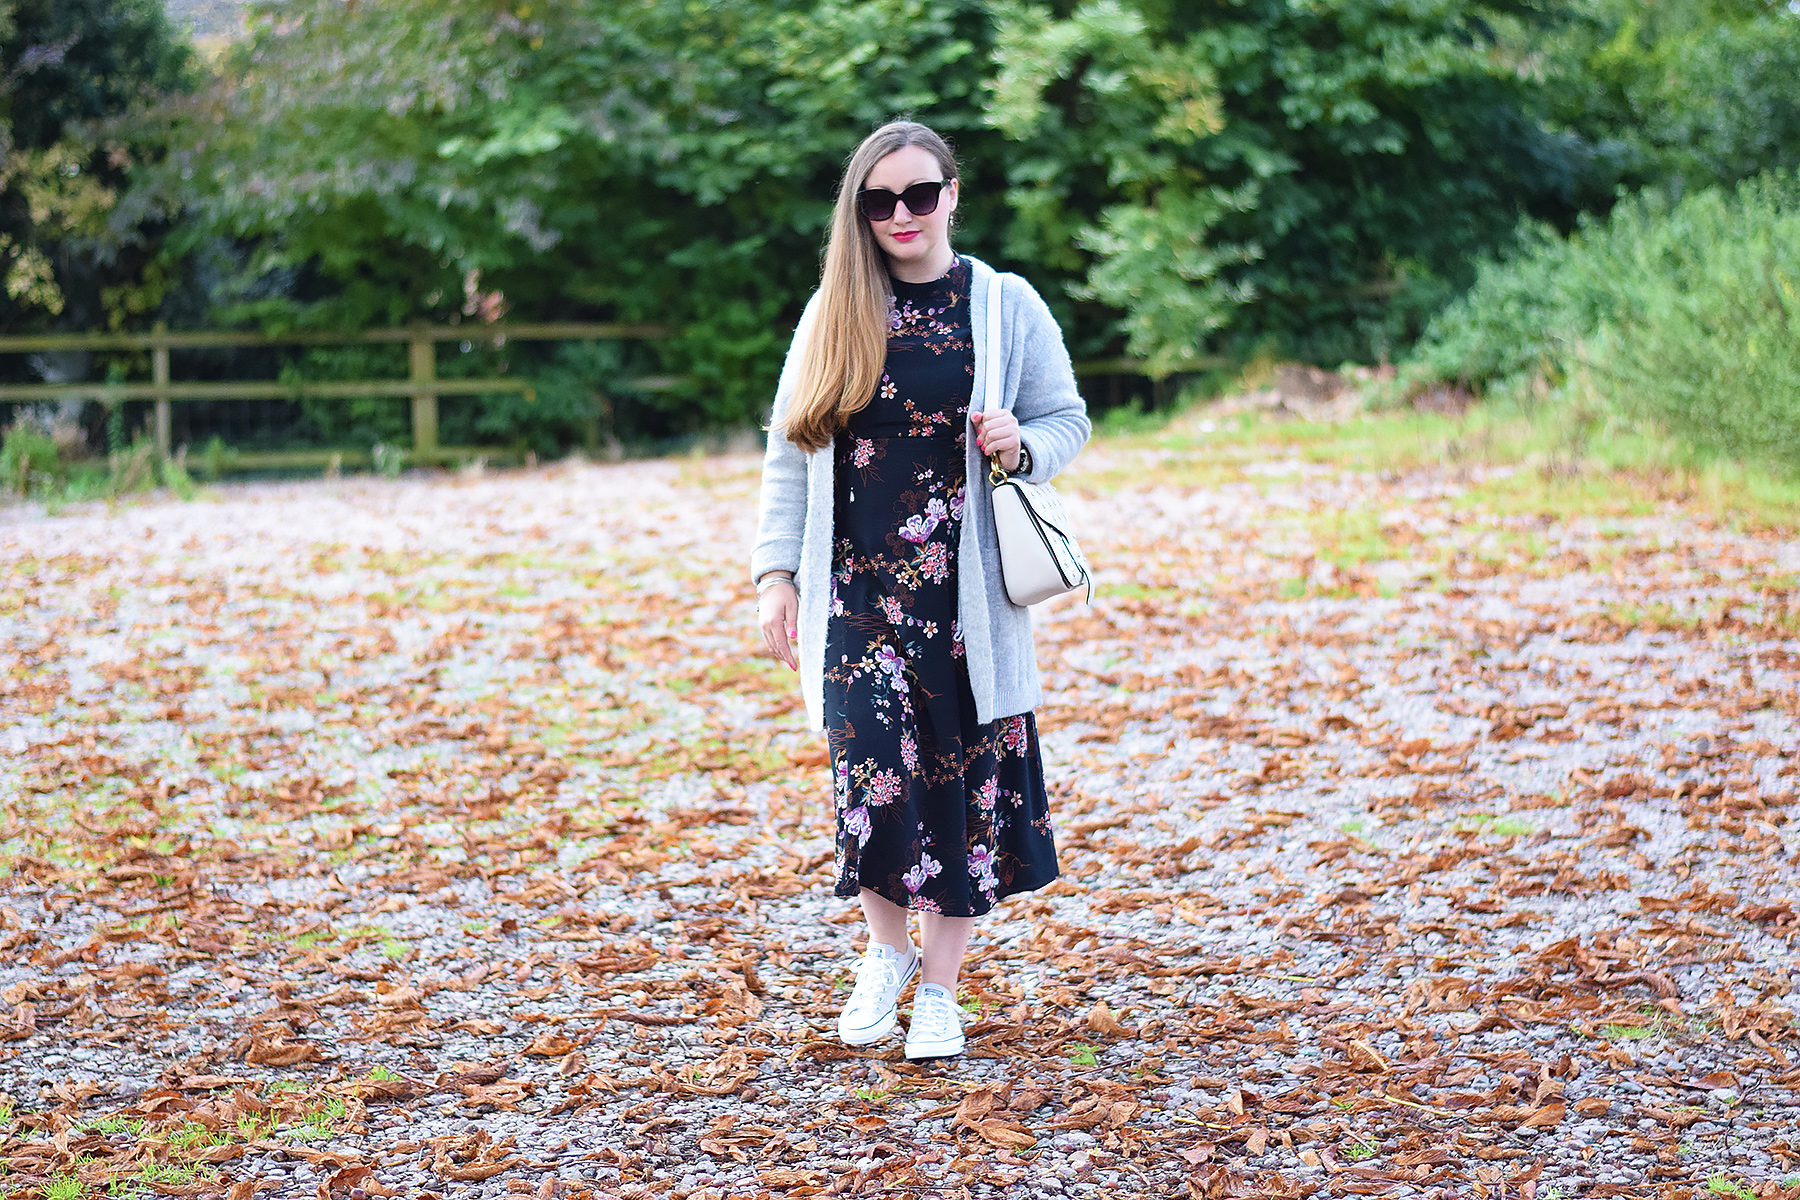 Winter Floral Midi Dress With converse and a cozy cardigan